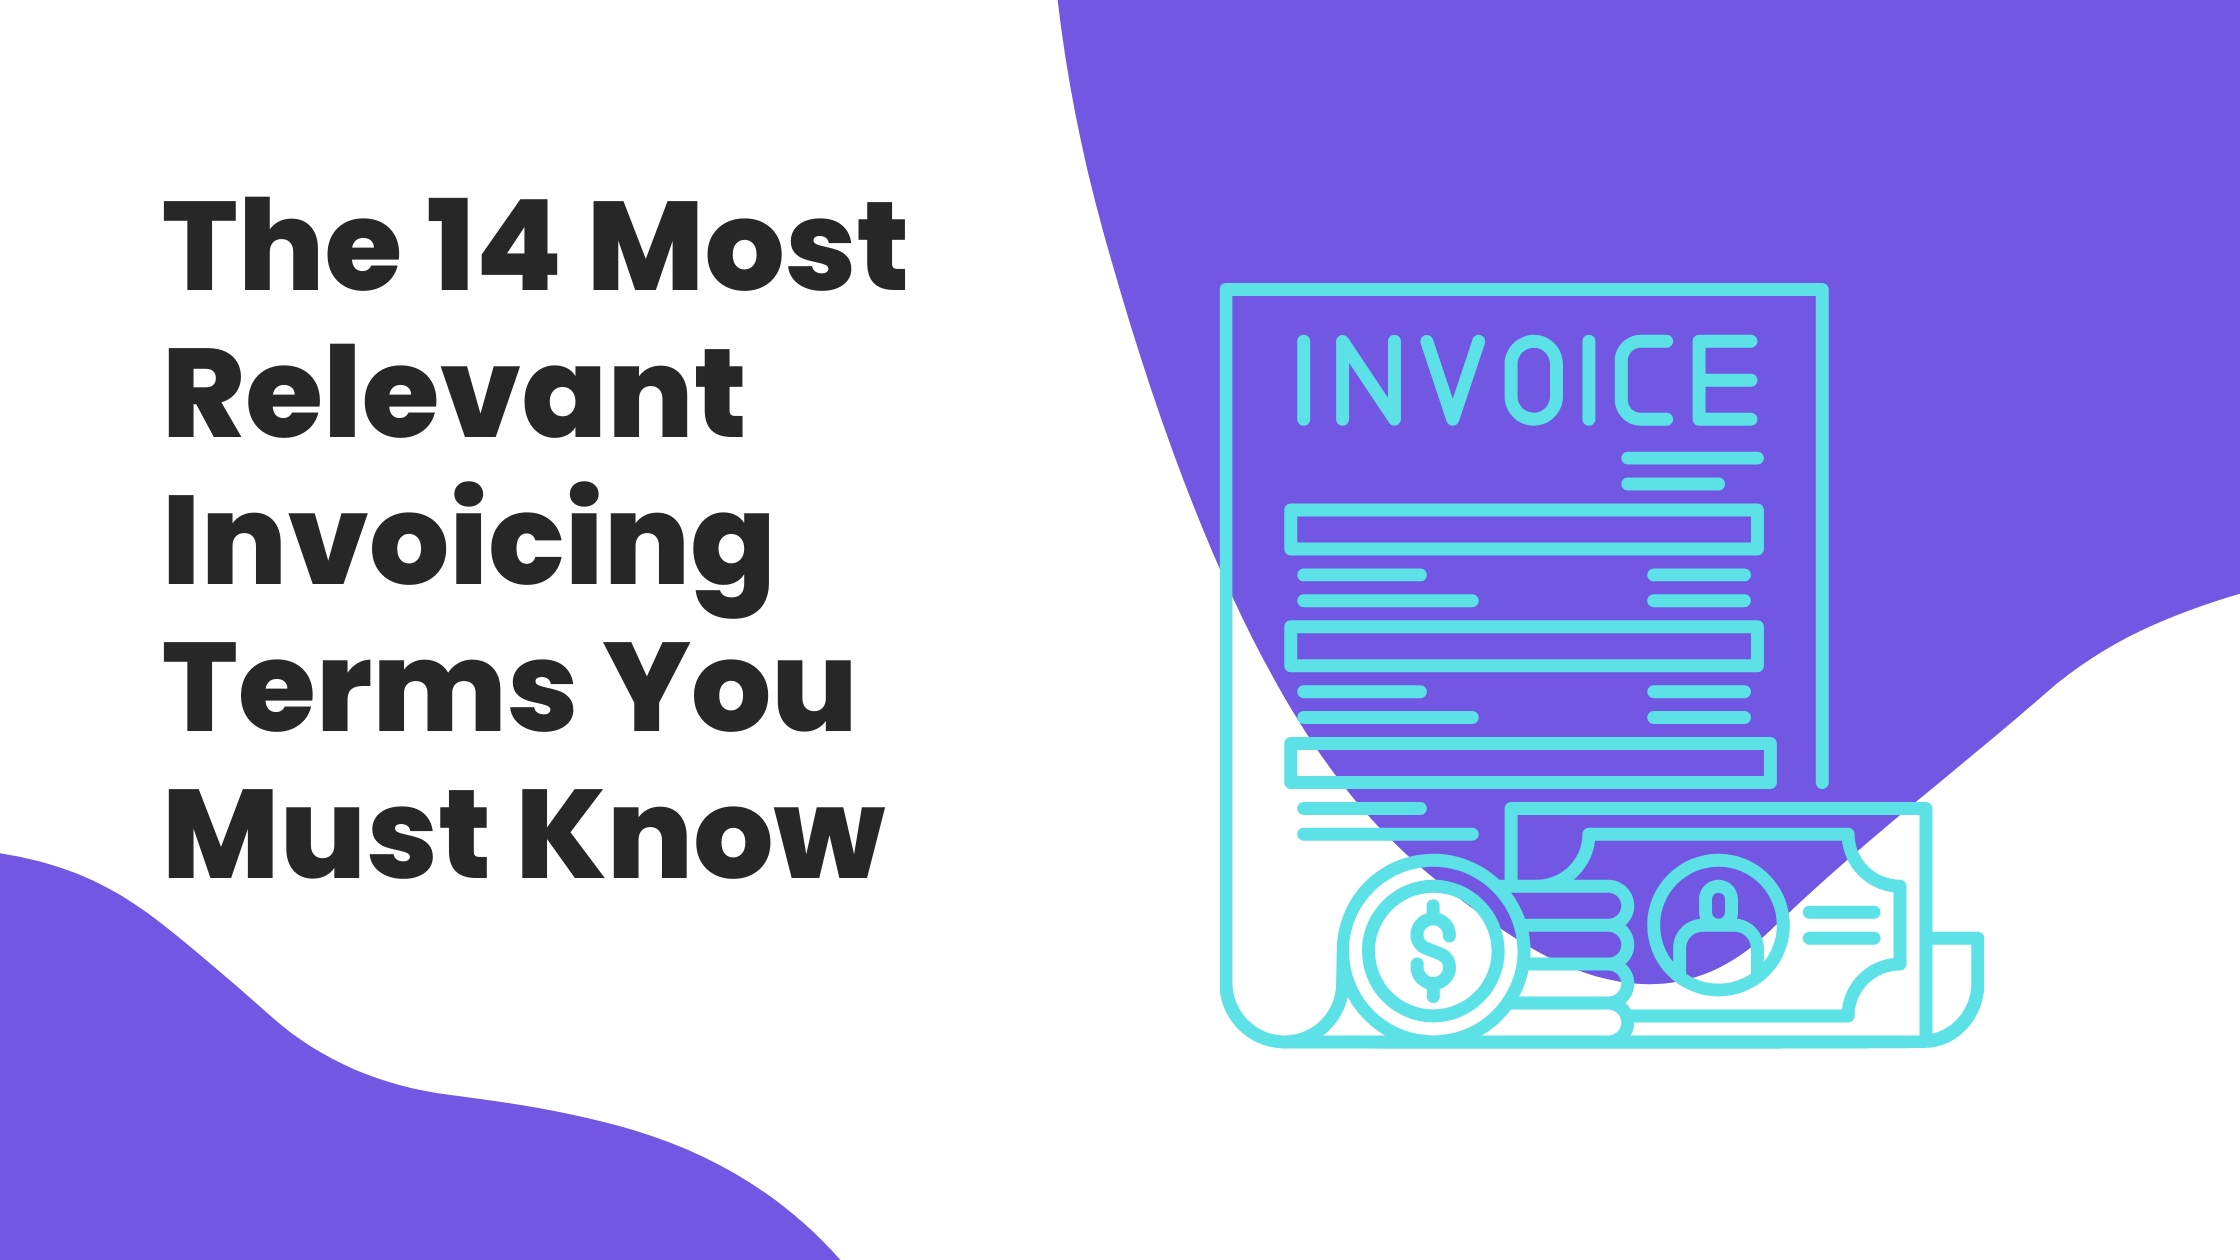 The 14 Most Relevant Invoicing Terms You Must Know